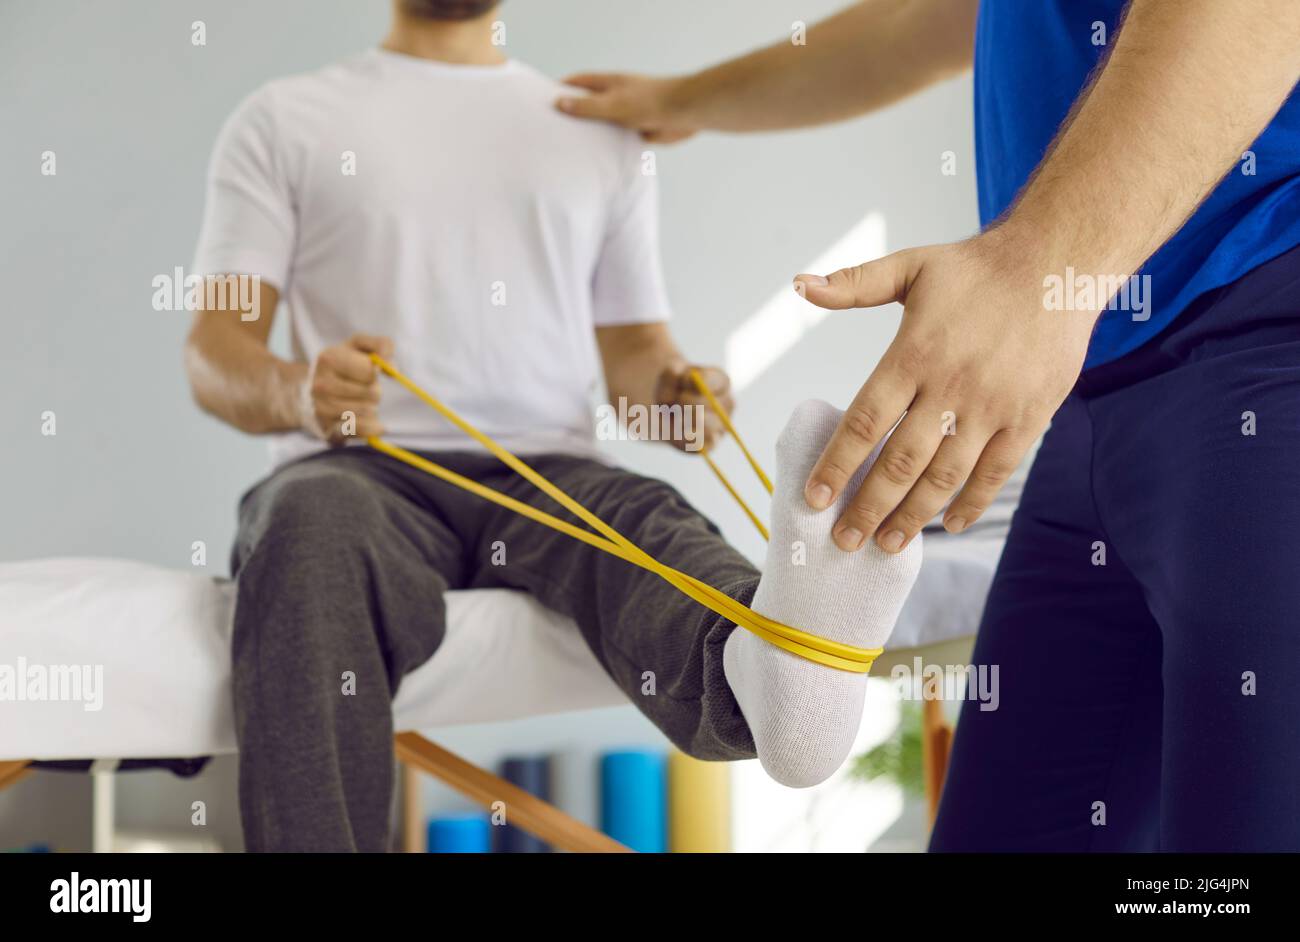 Man doing physical exercises with elastic band at physiotherapy and rehabilitation clinic Stock Photo